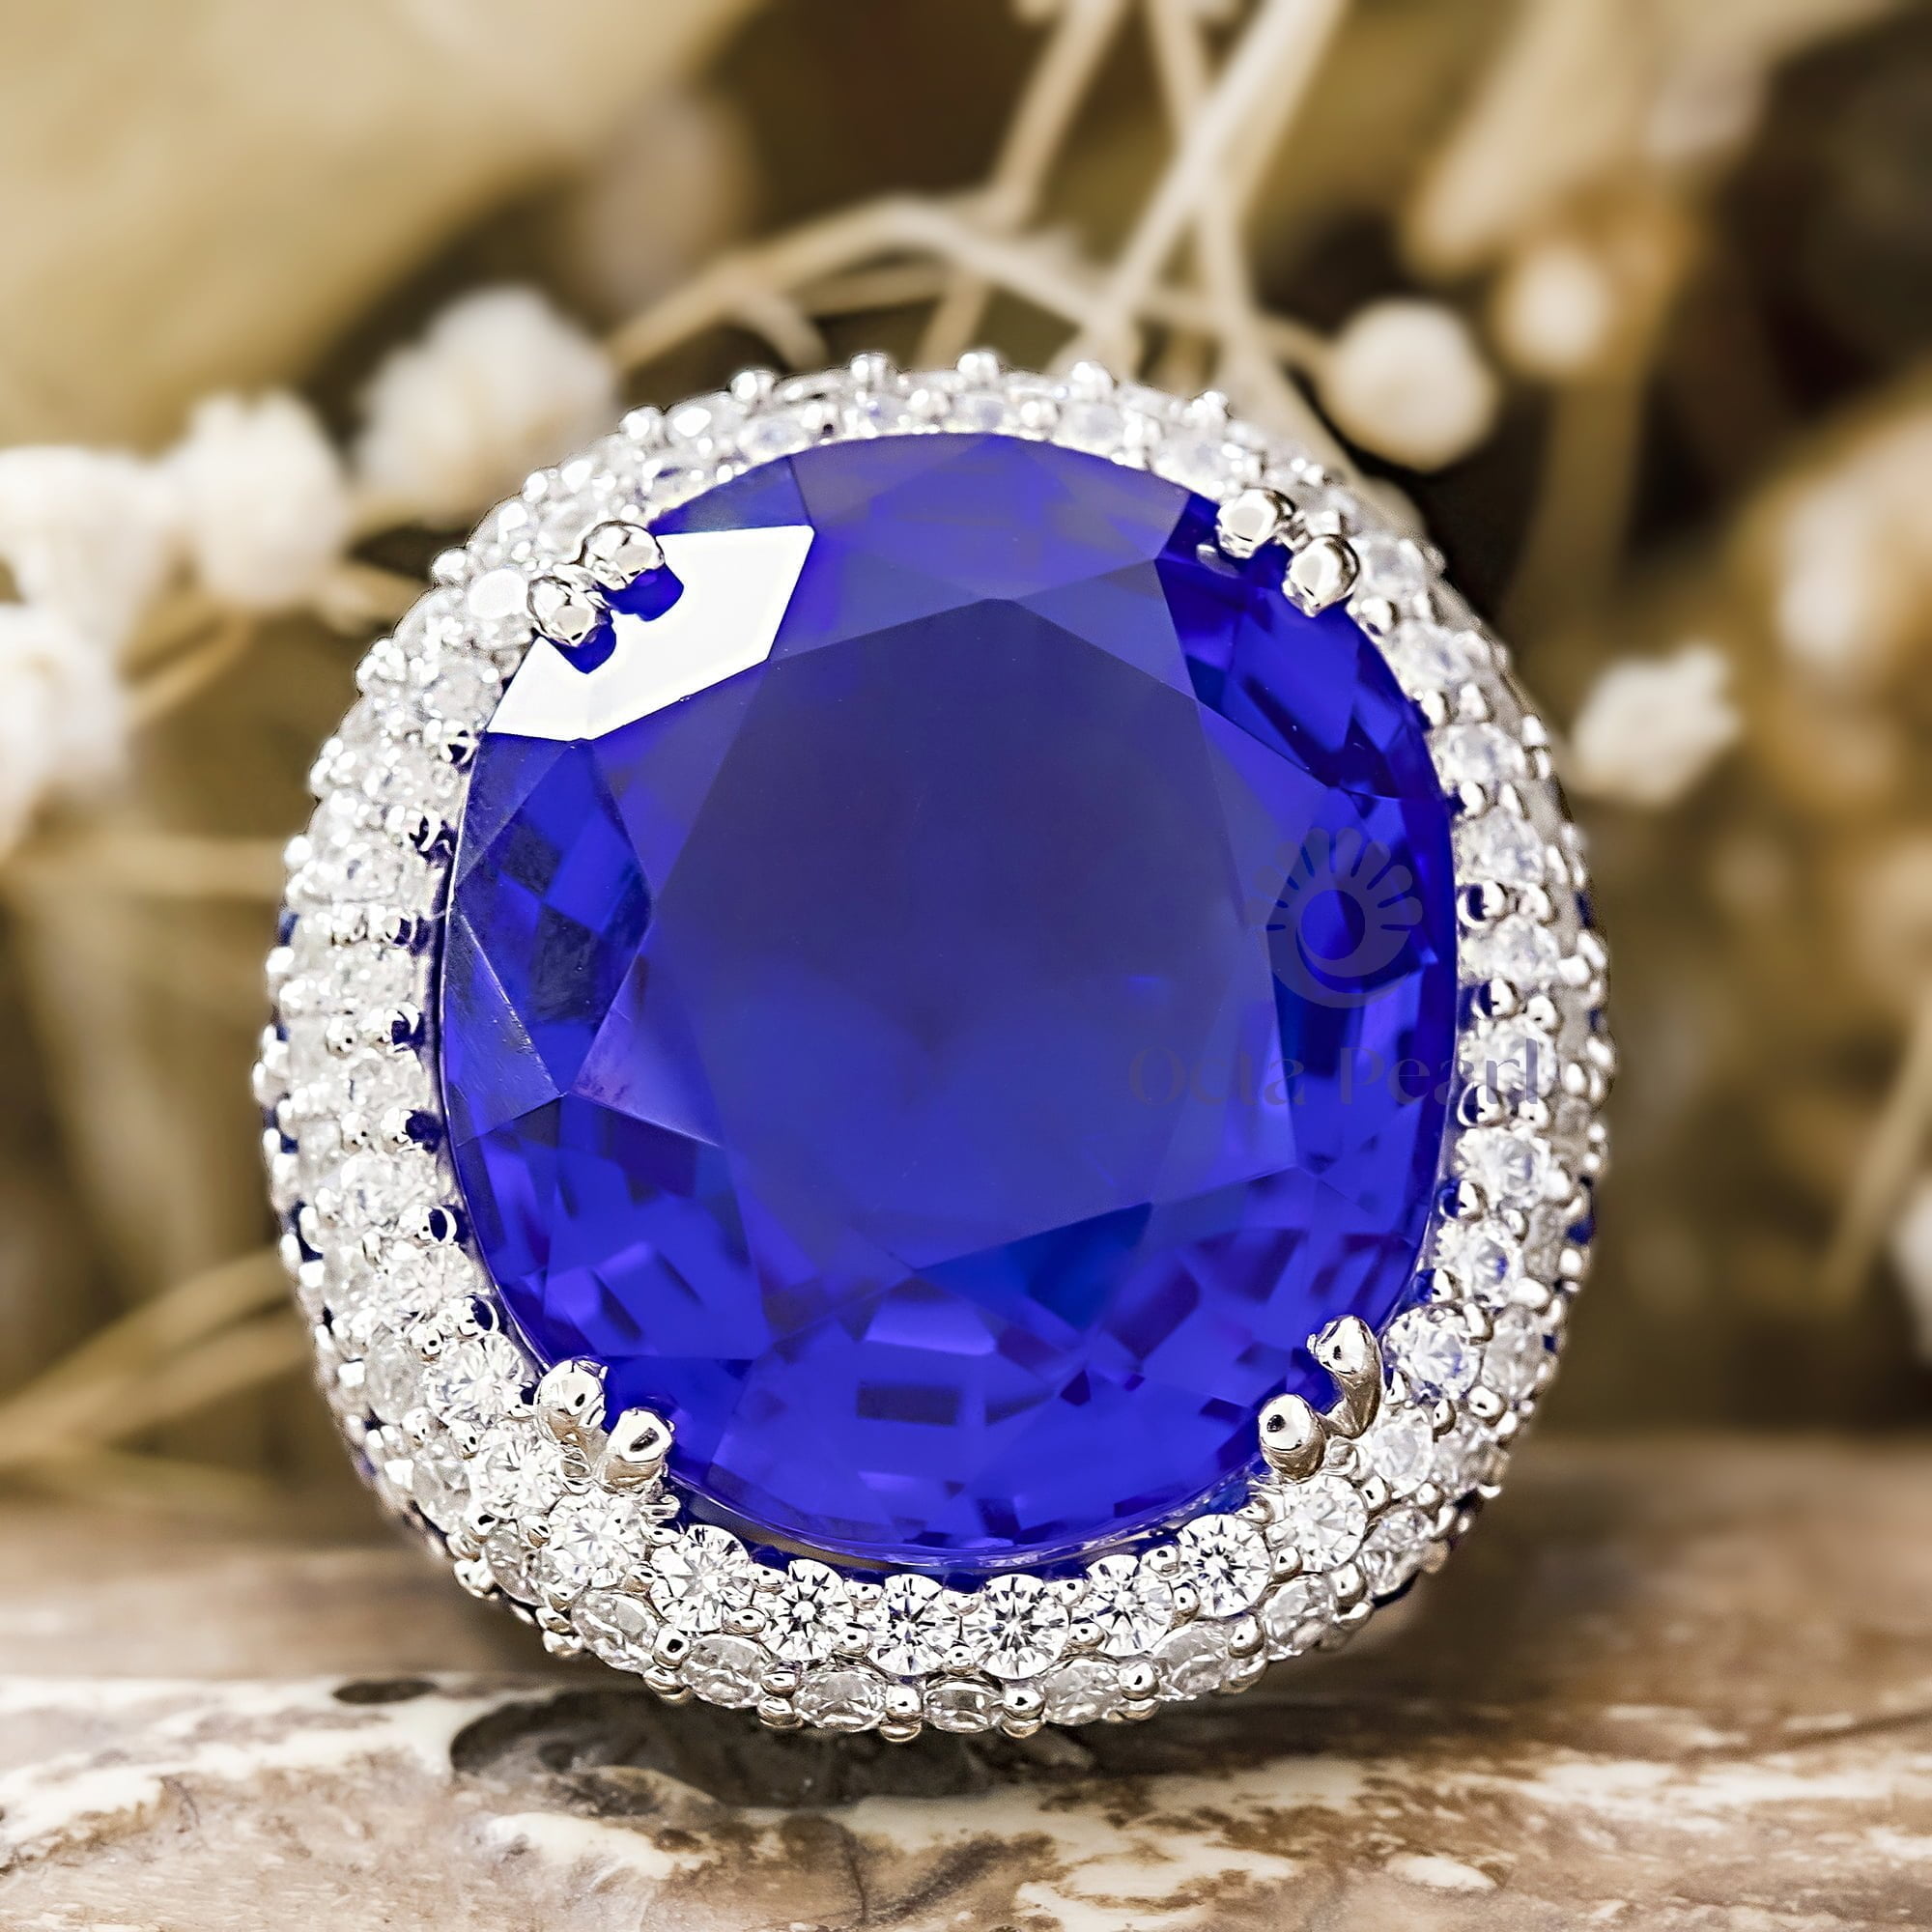 23x19 MM Large Sapphire Blue Oval With Round Cut CZ Stone Party Wear Cocktail Ring For Women